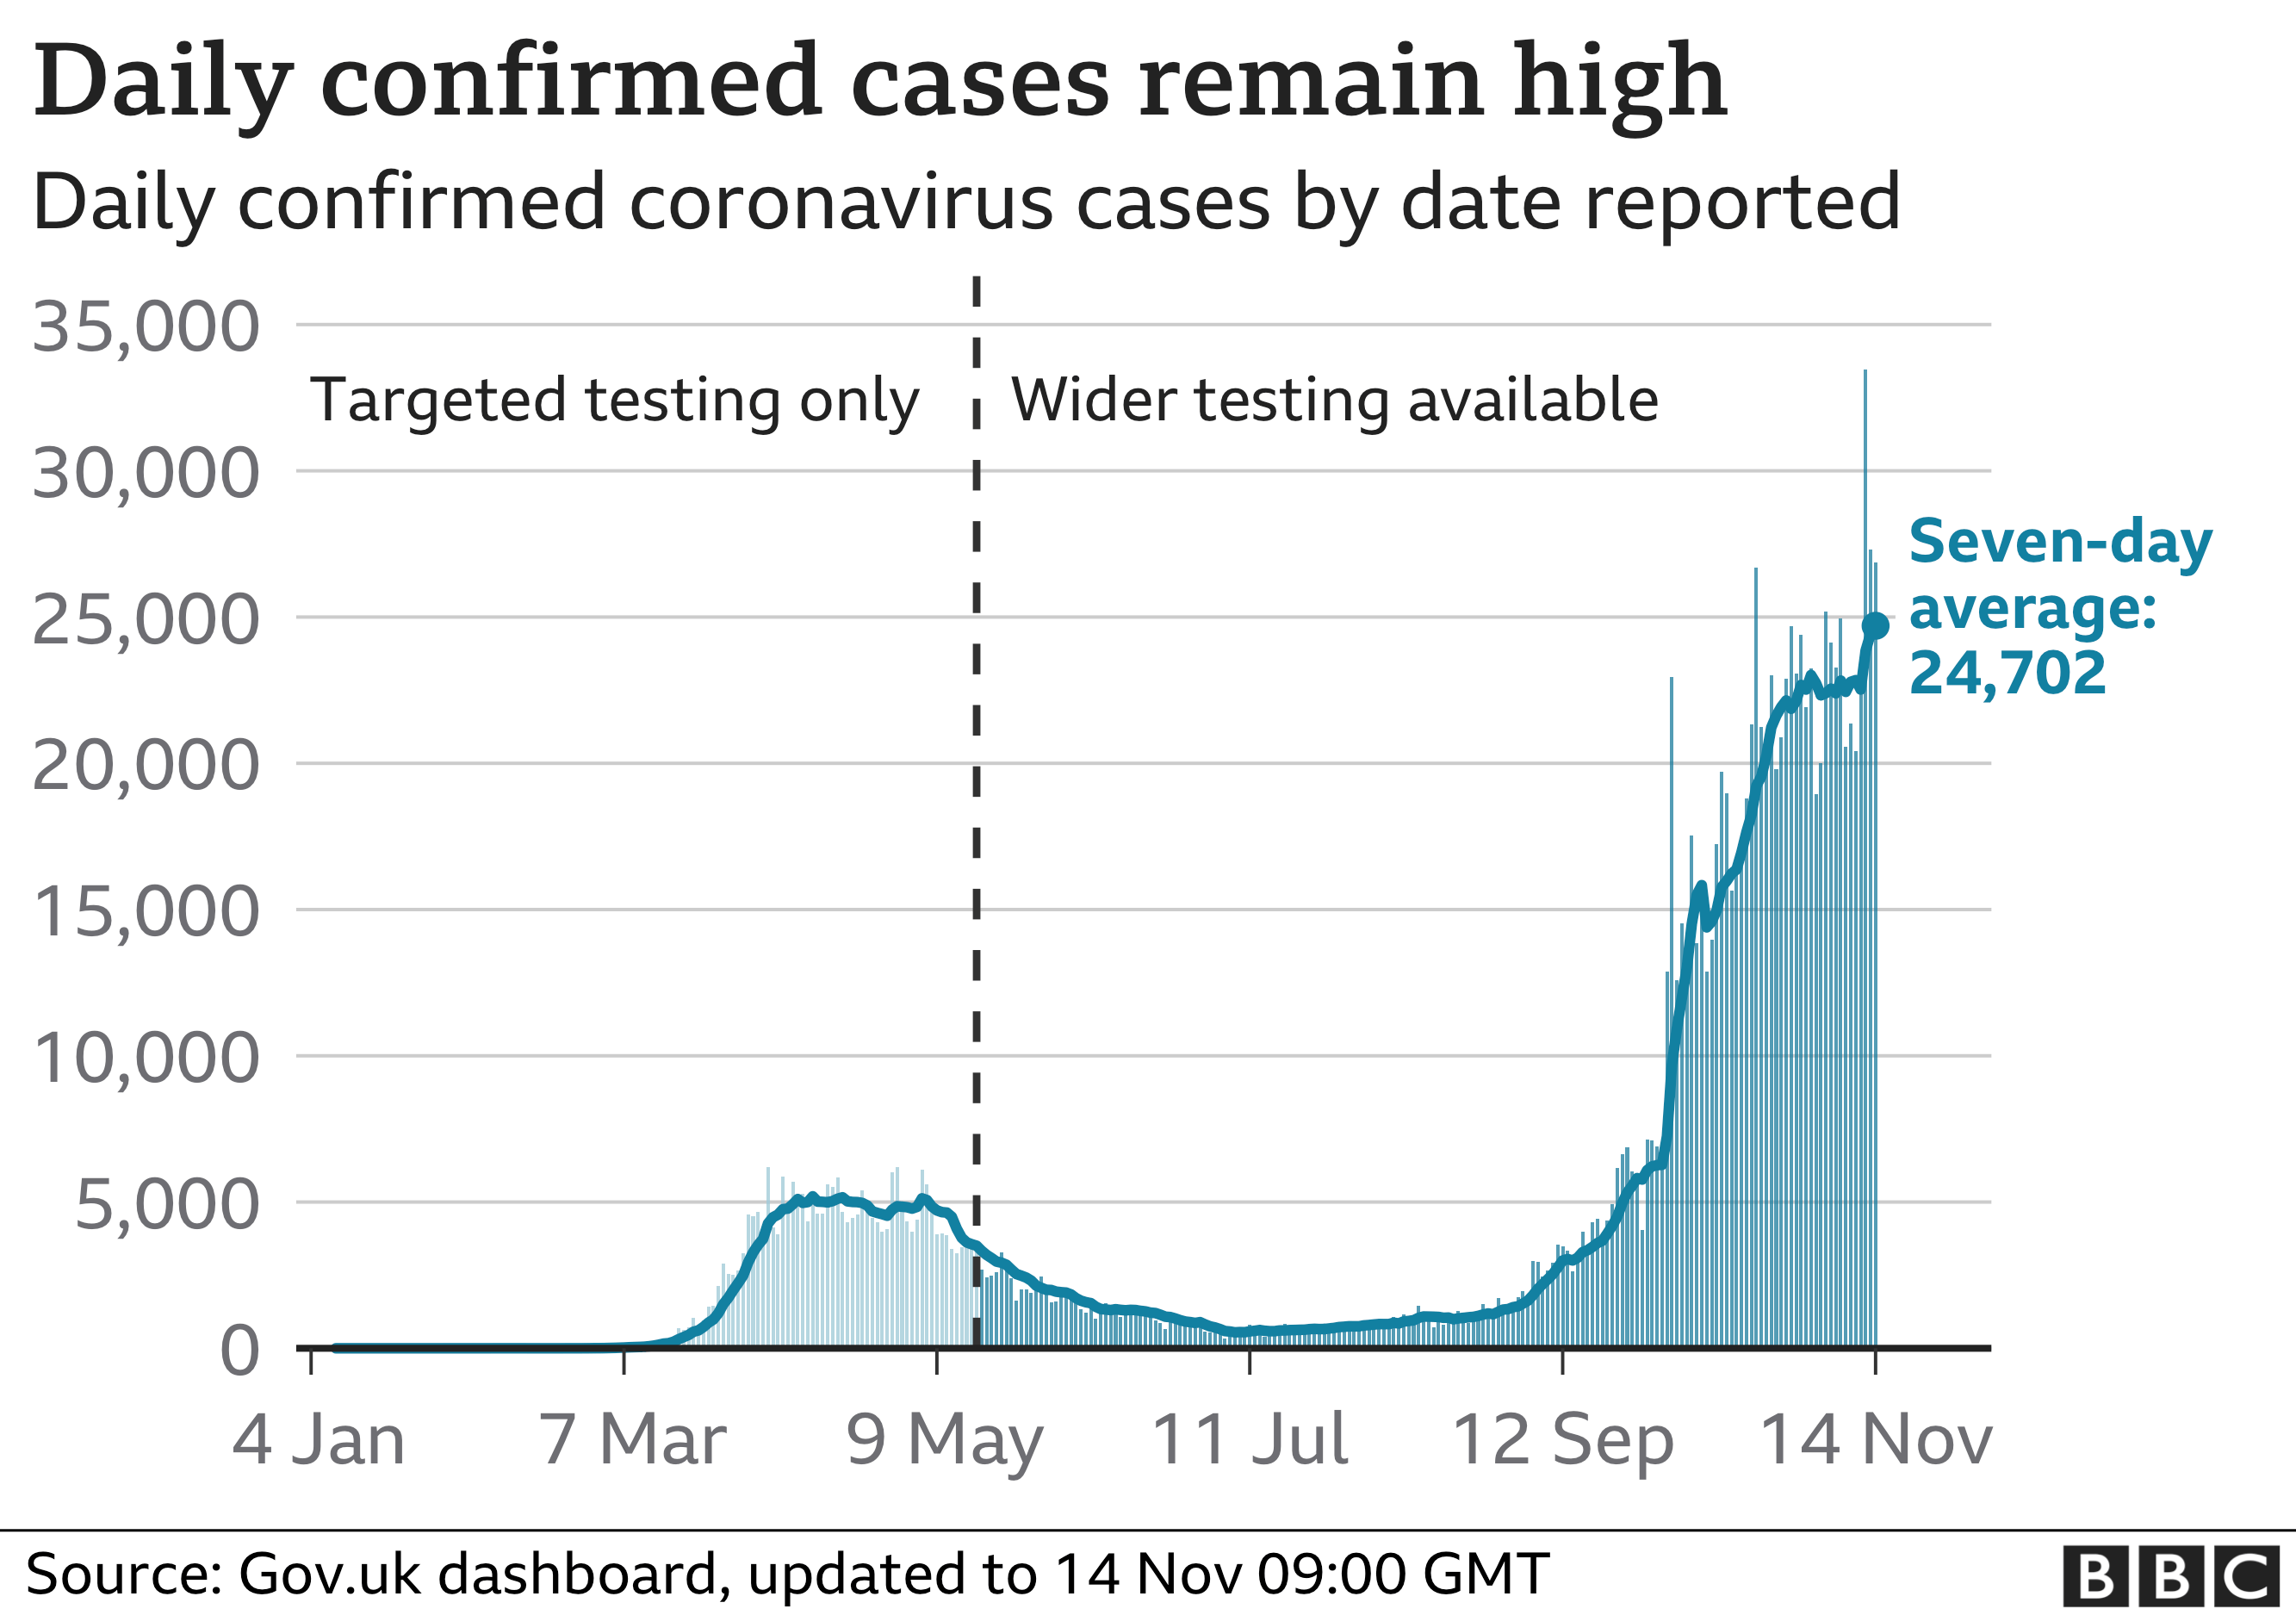 Daily confirmed cases for 14 November 2020